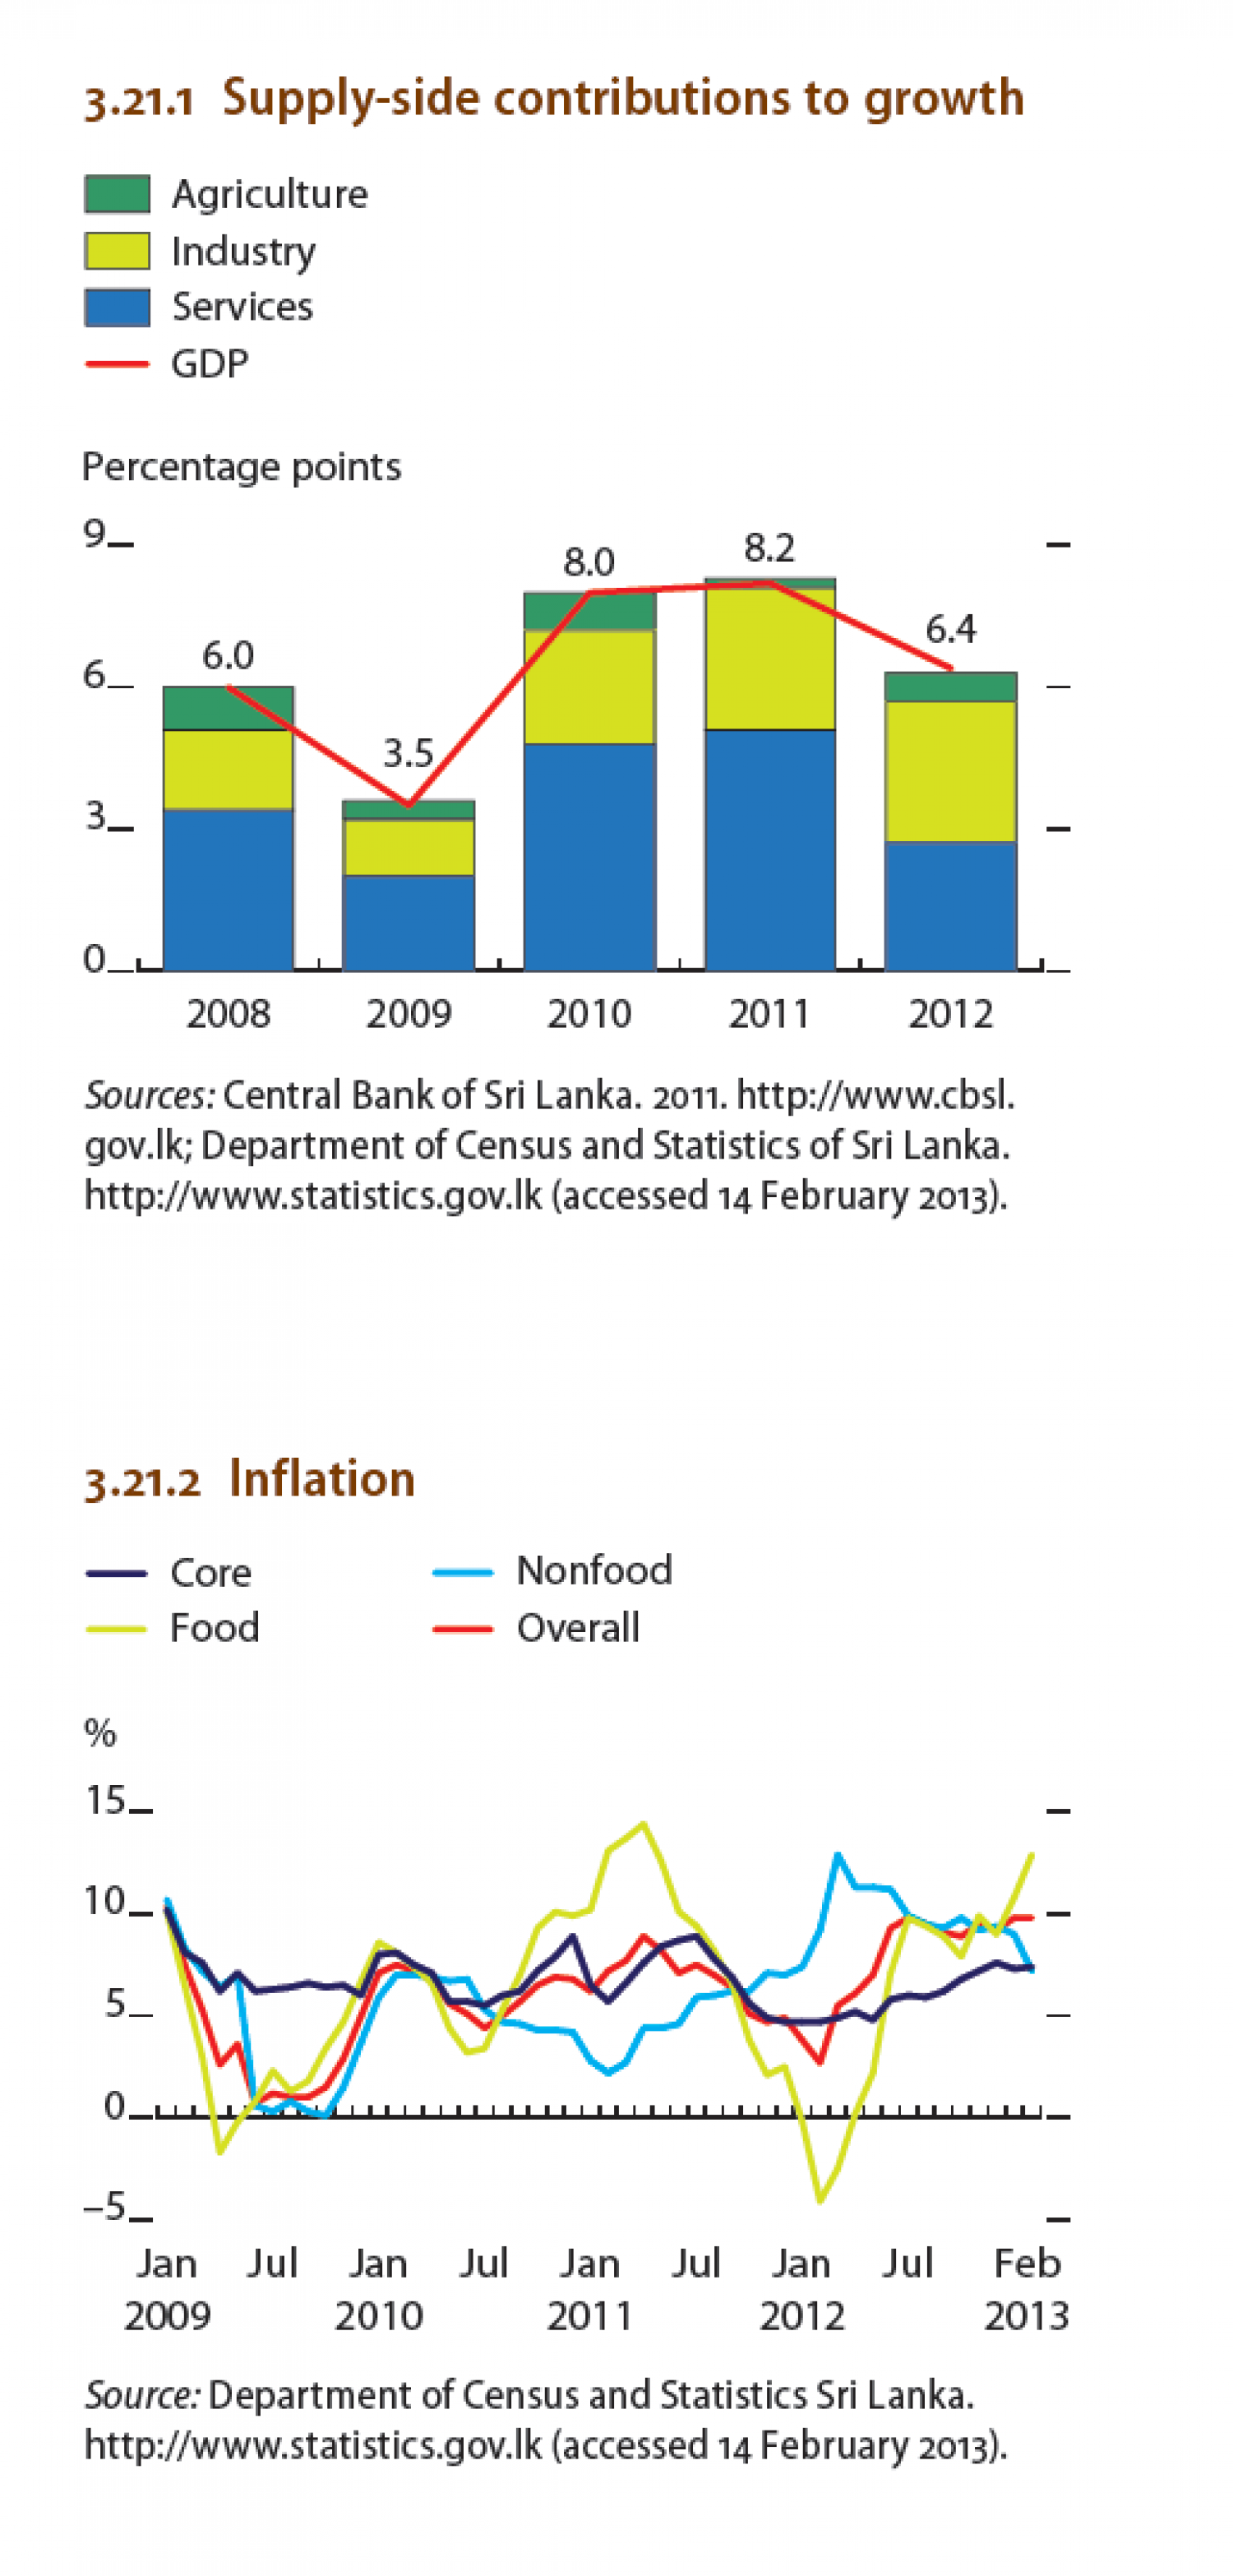 Sri Lanka - Supply-side contributions to growth, Inflation Infographic